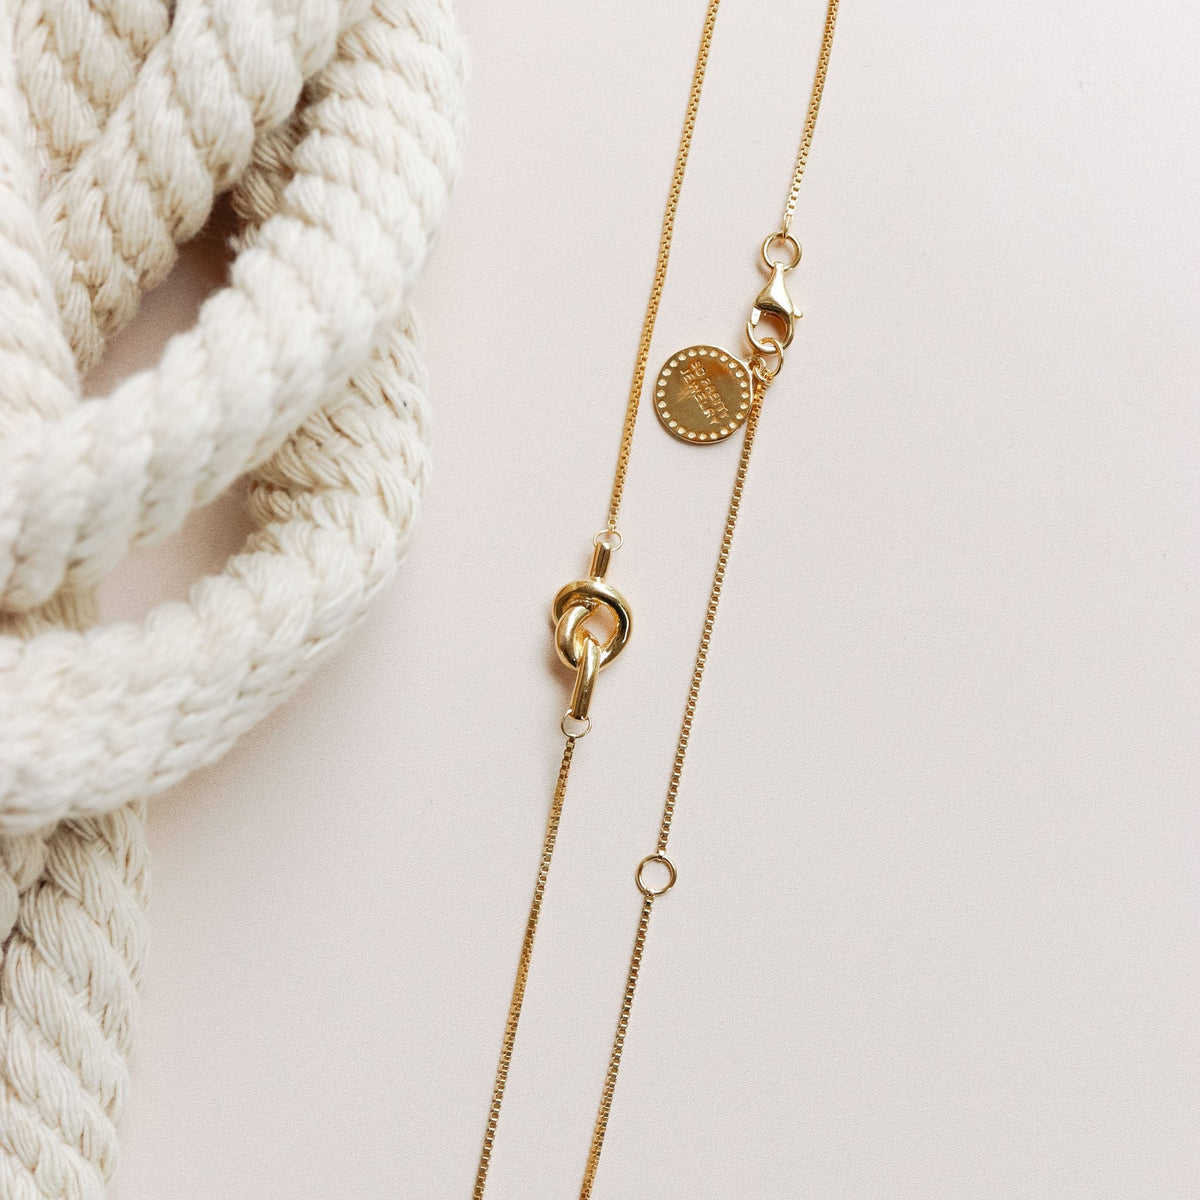 POISE OFFSET KNOT NECKLACE - GOLD - SO PRETTY CARA COTTER